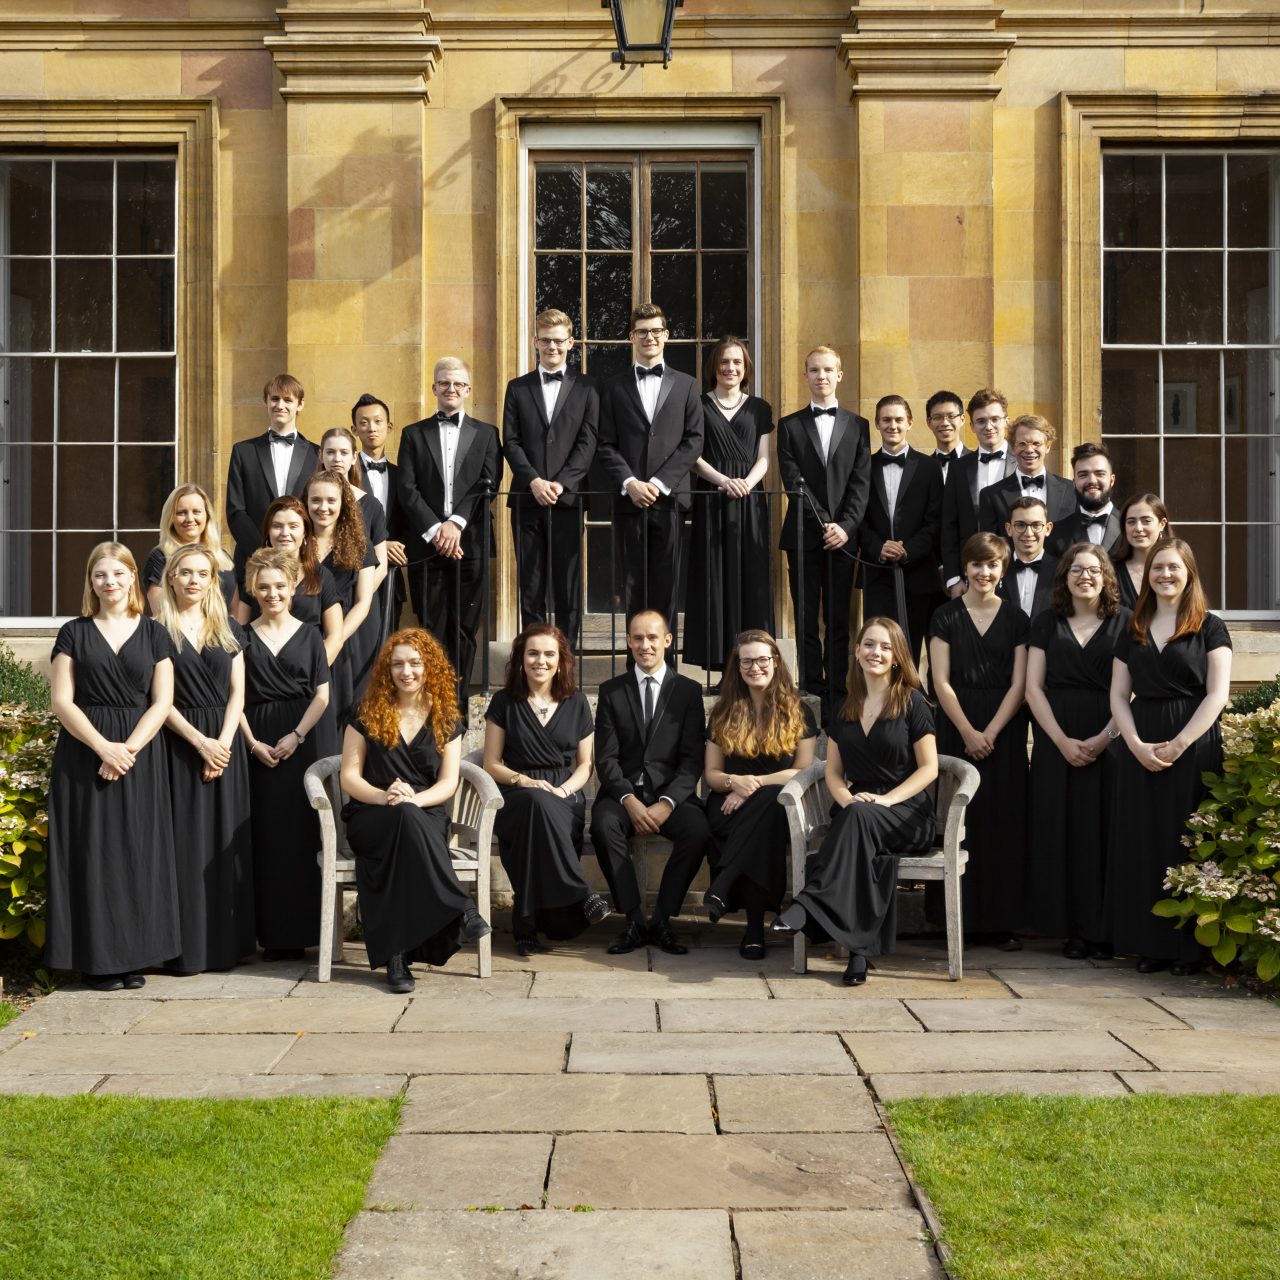 The Choir of Clare College